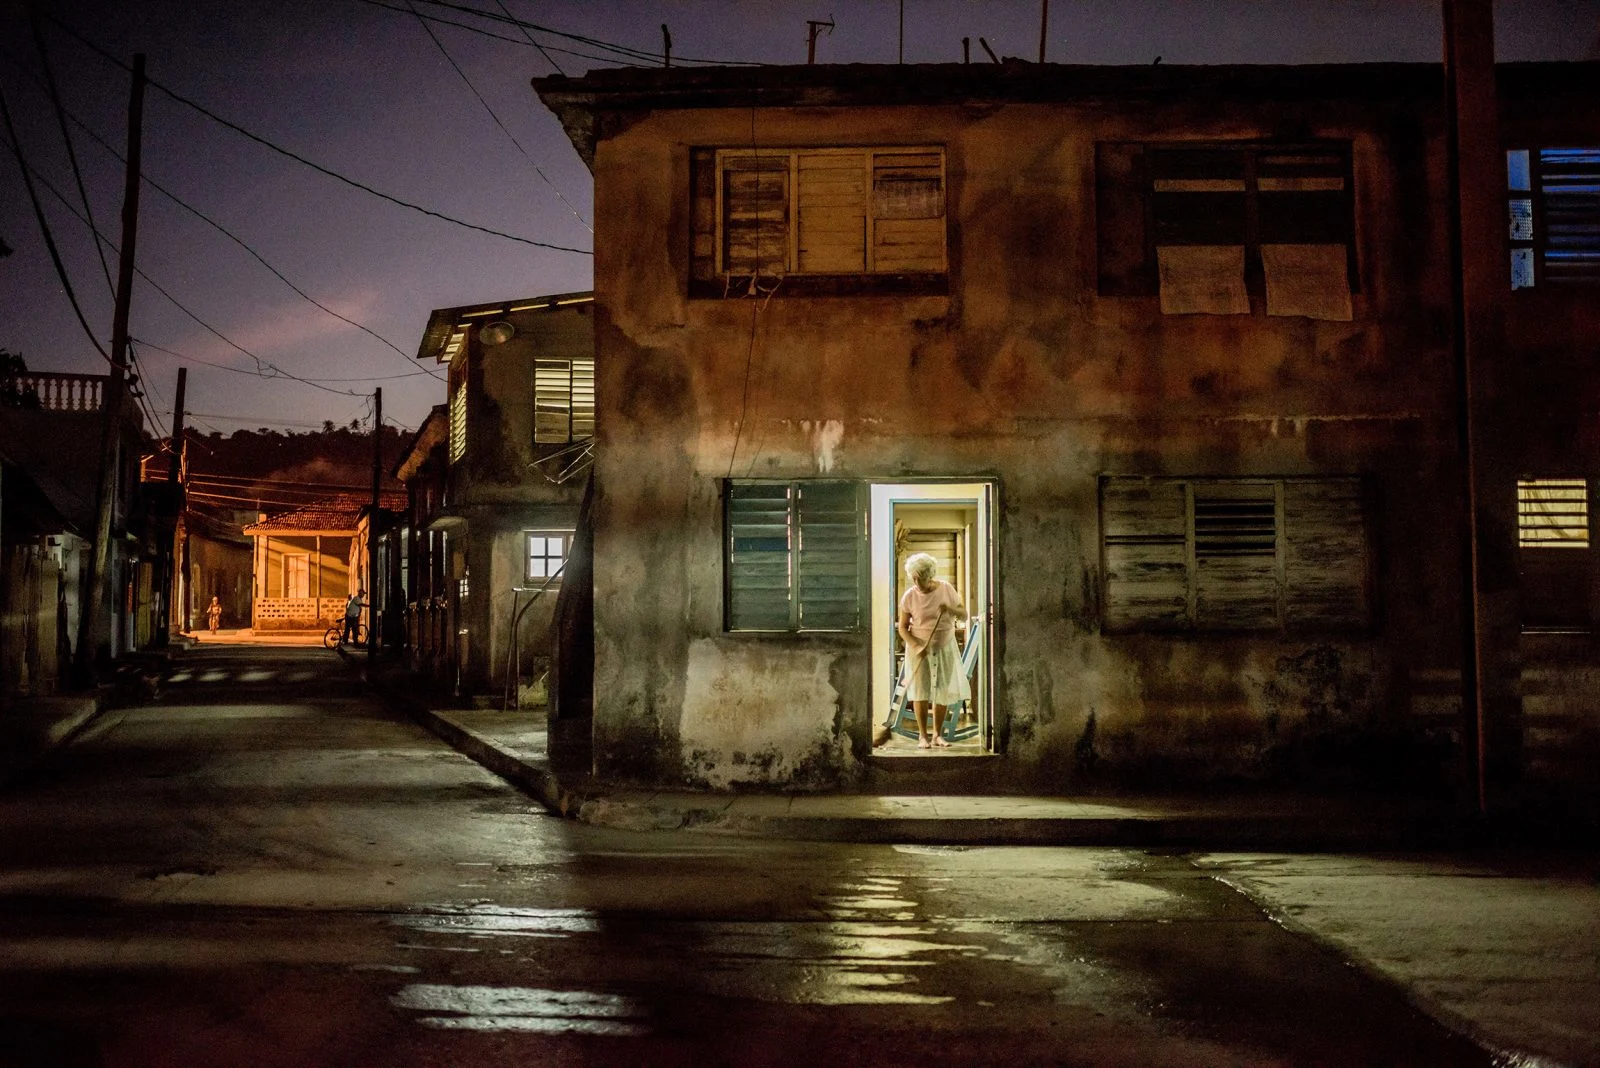 Framed in her doorway, a woman swept her home in Baracoa, Cuba, on January 25, 2016.